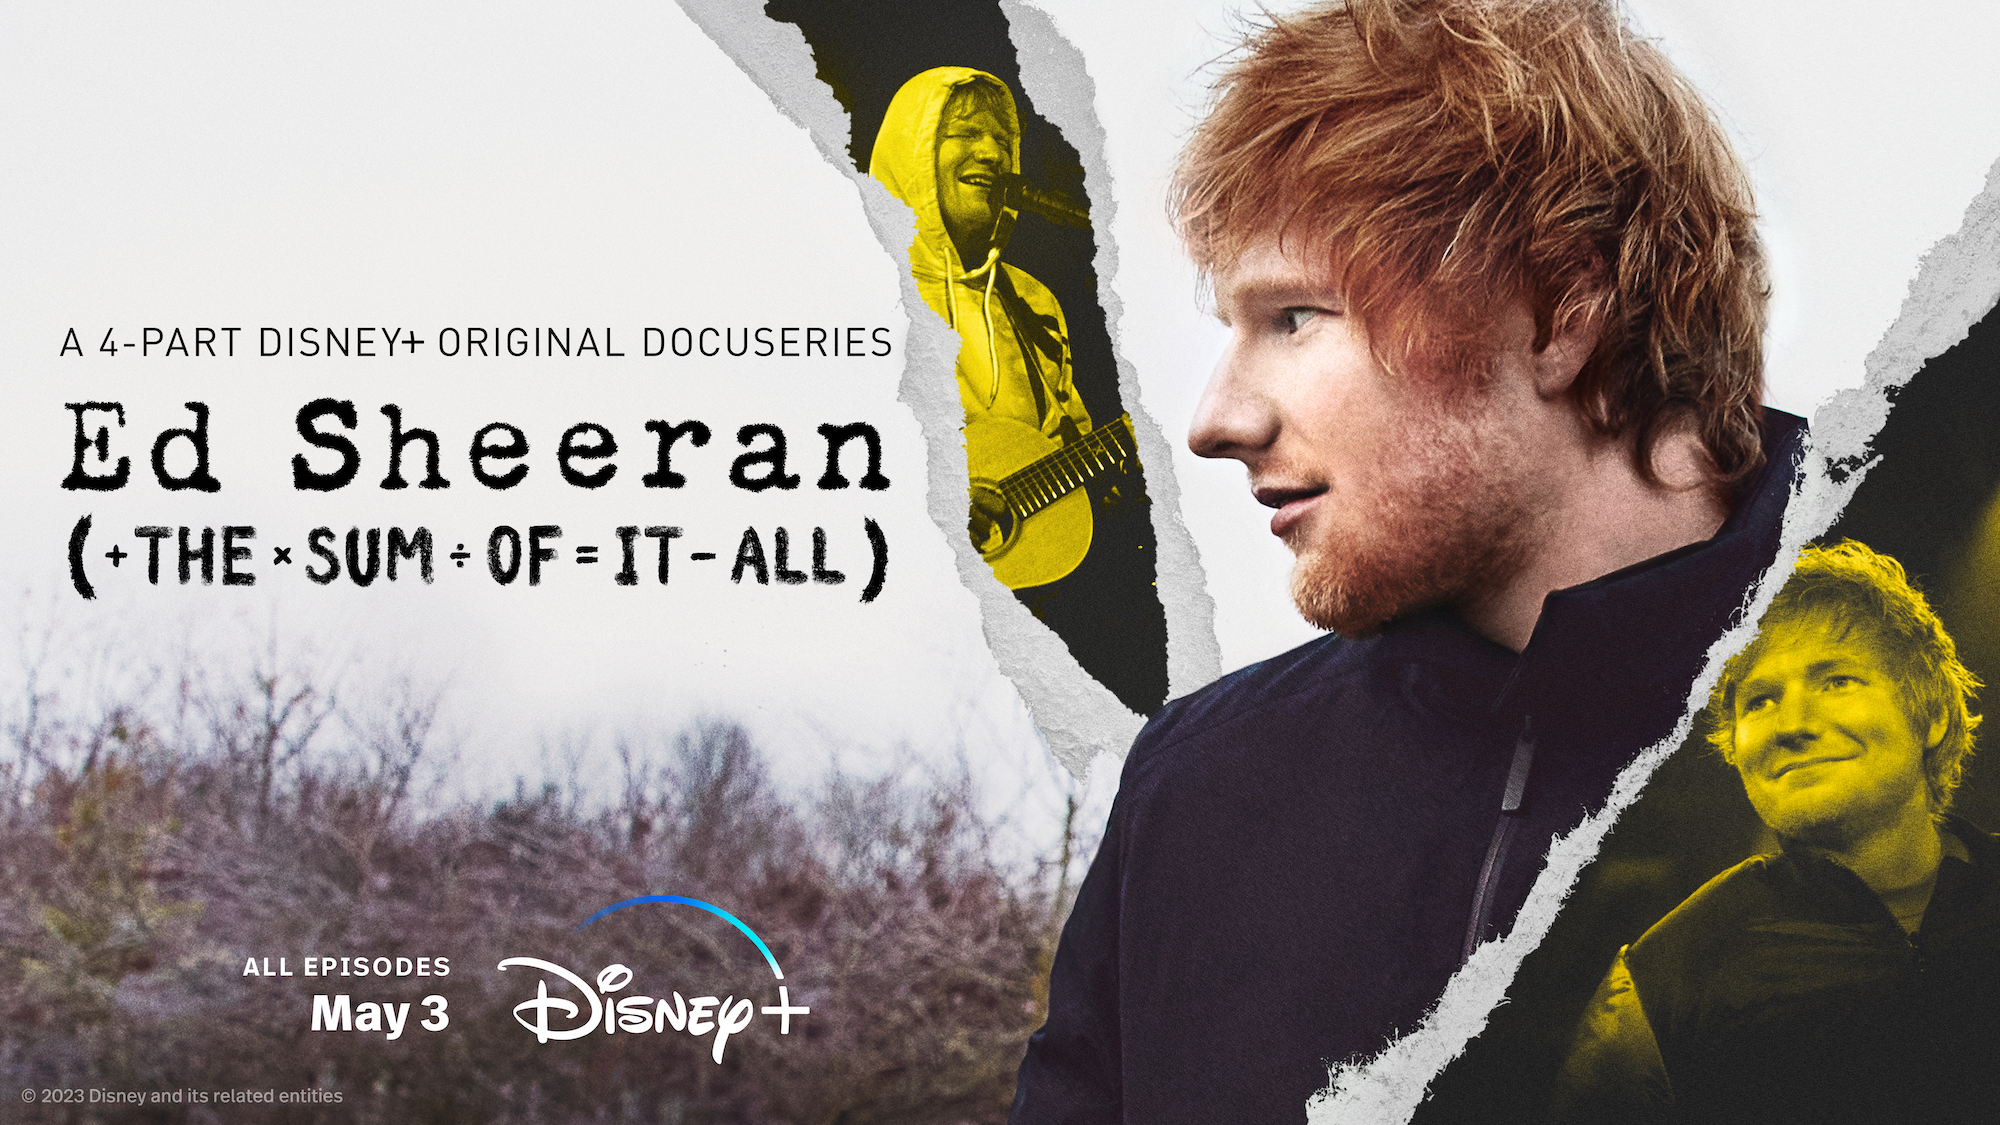 ‘Ed Sheeran: The Sum of It All’ Heading to Disney+ in May